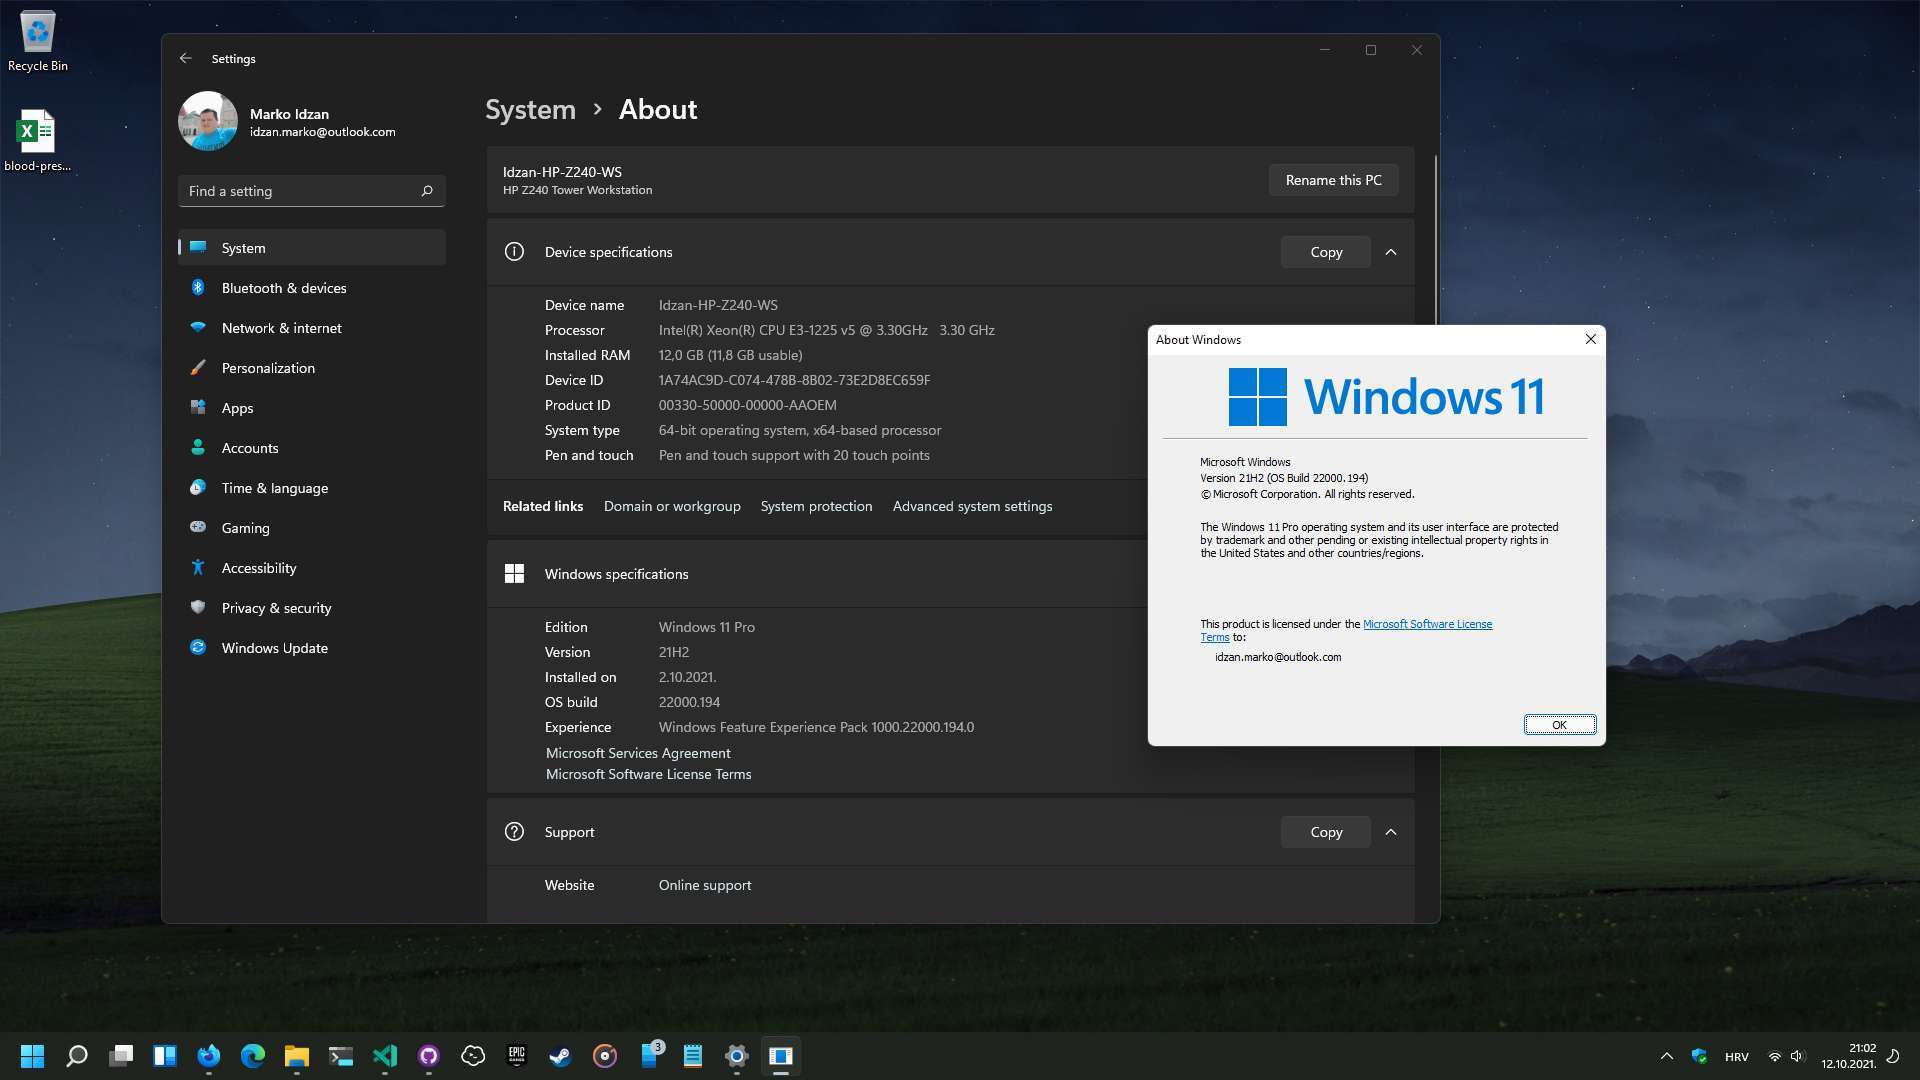 Upgrading from Windows 10 to Windows 11 on unsupported hardware